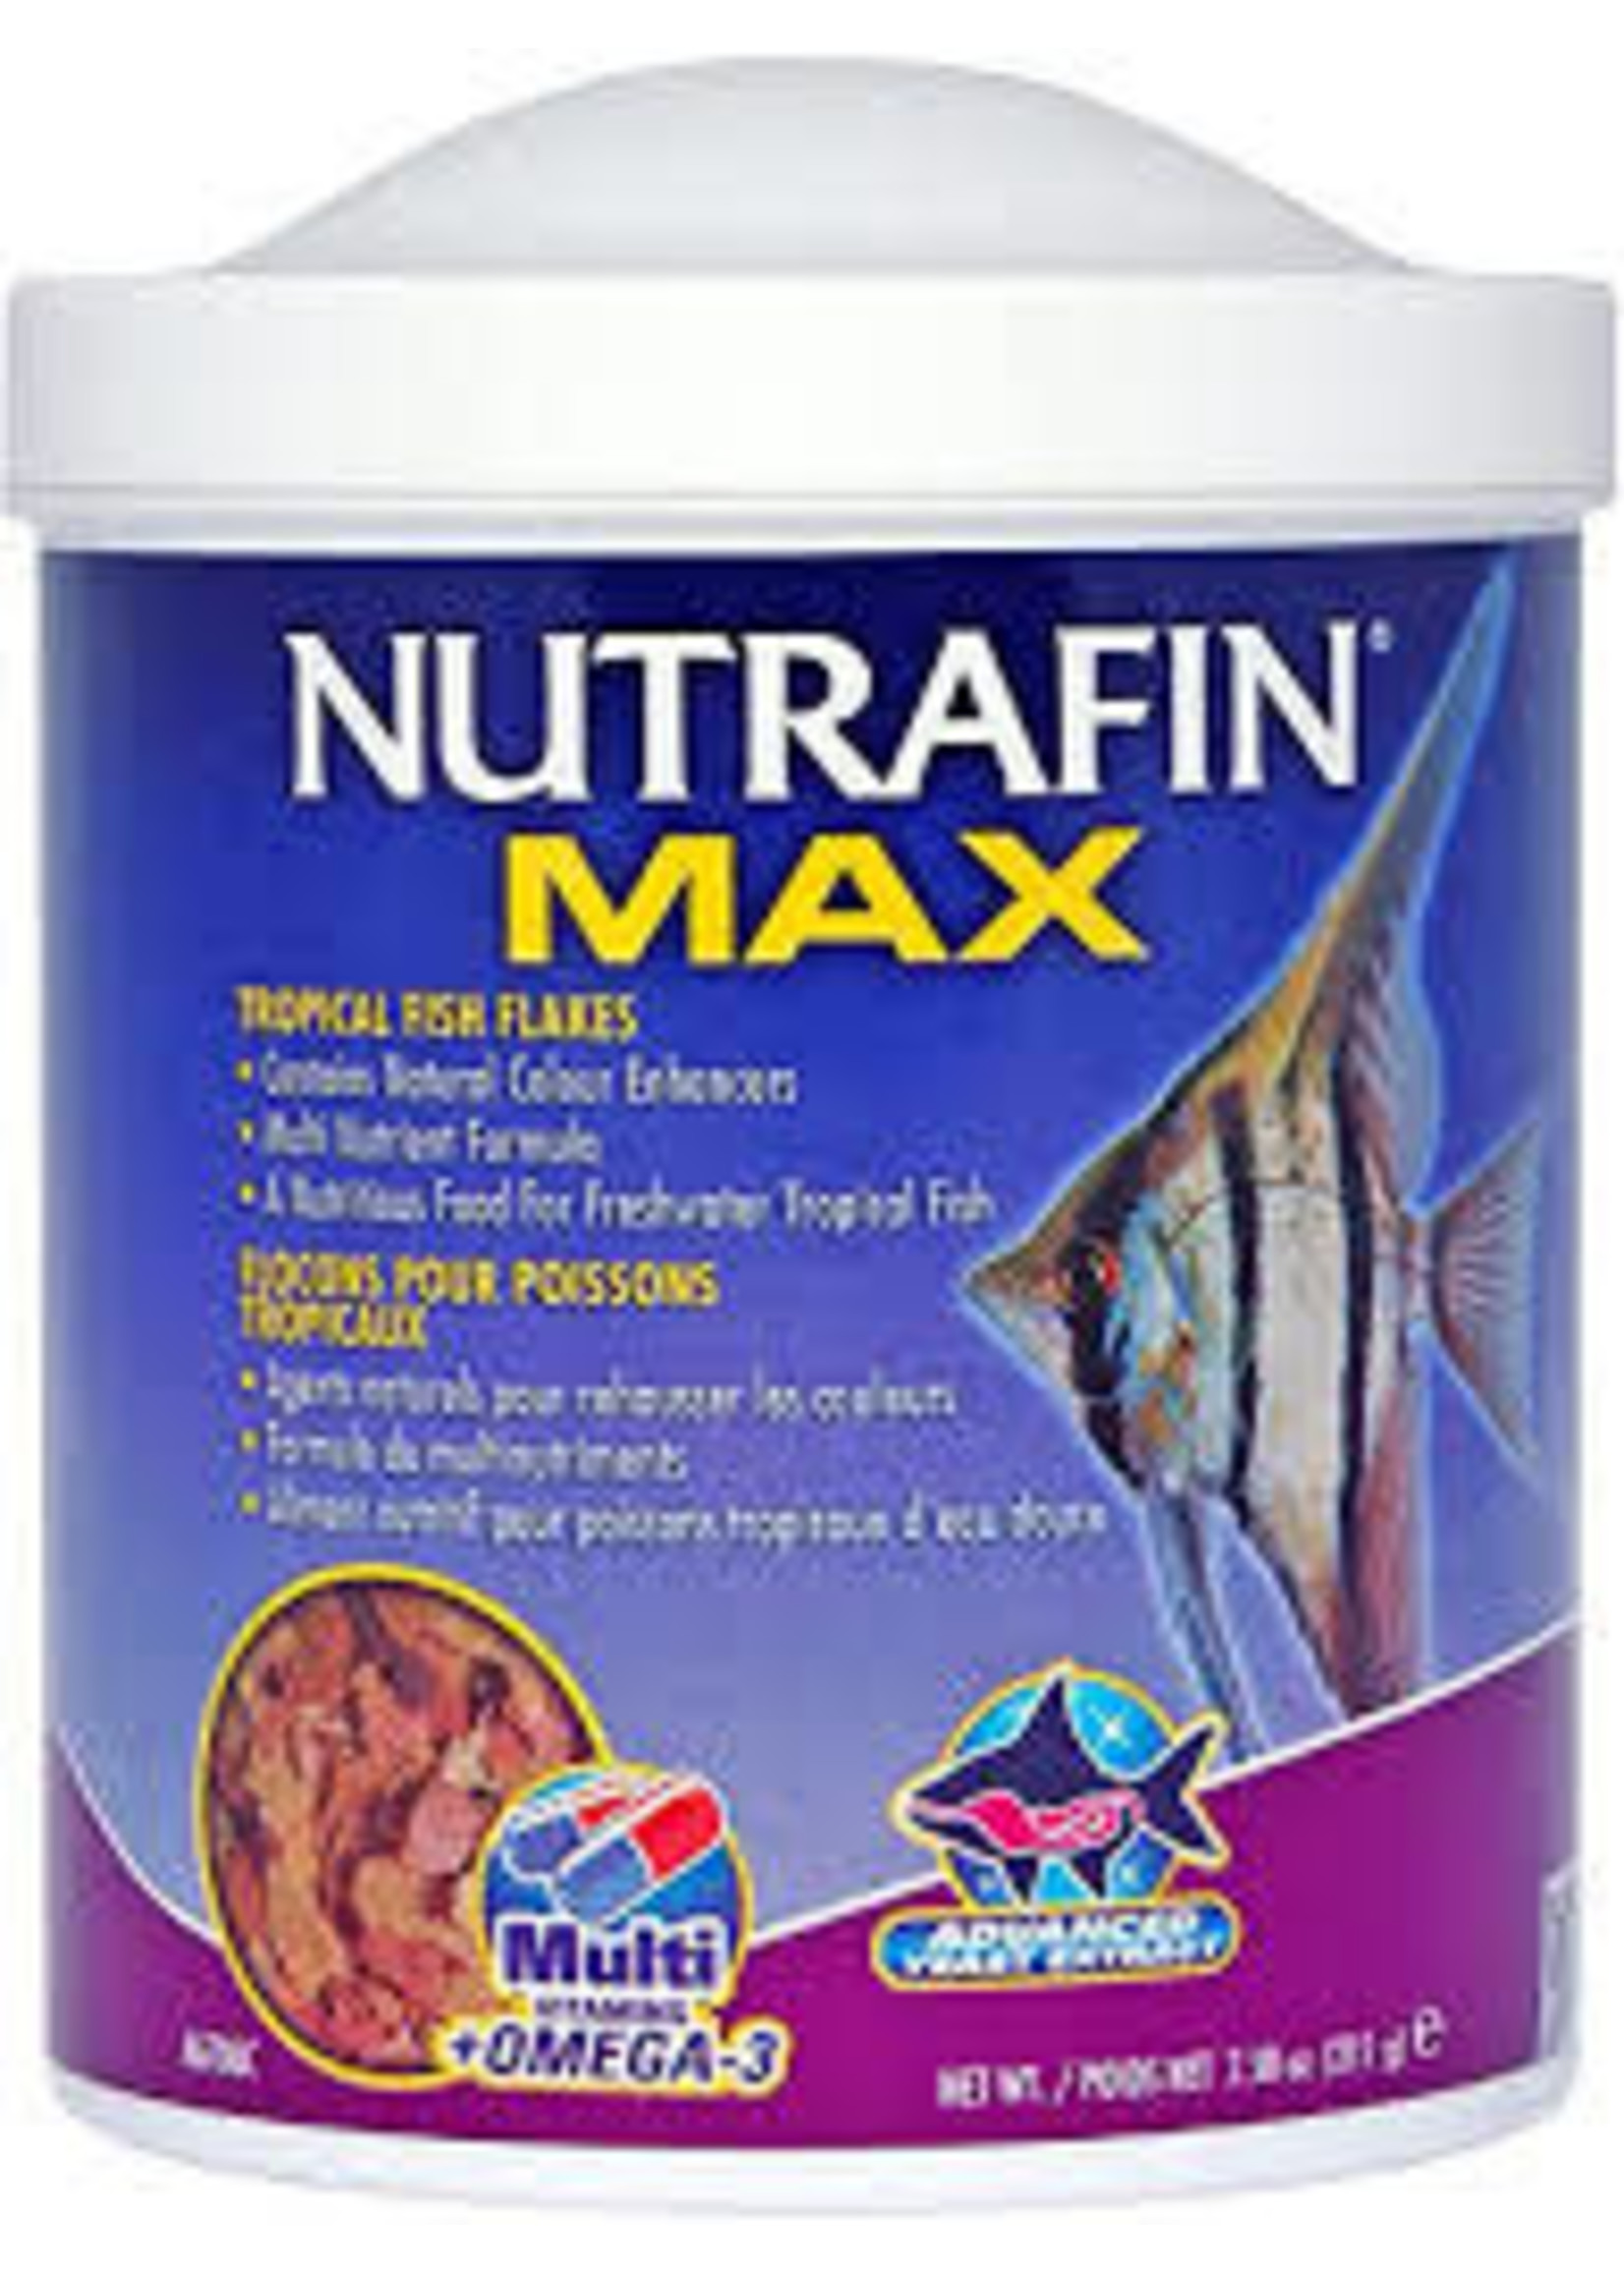 Nutrafin Nutrafin Max - Tropical Fish Flakes